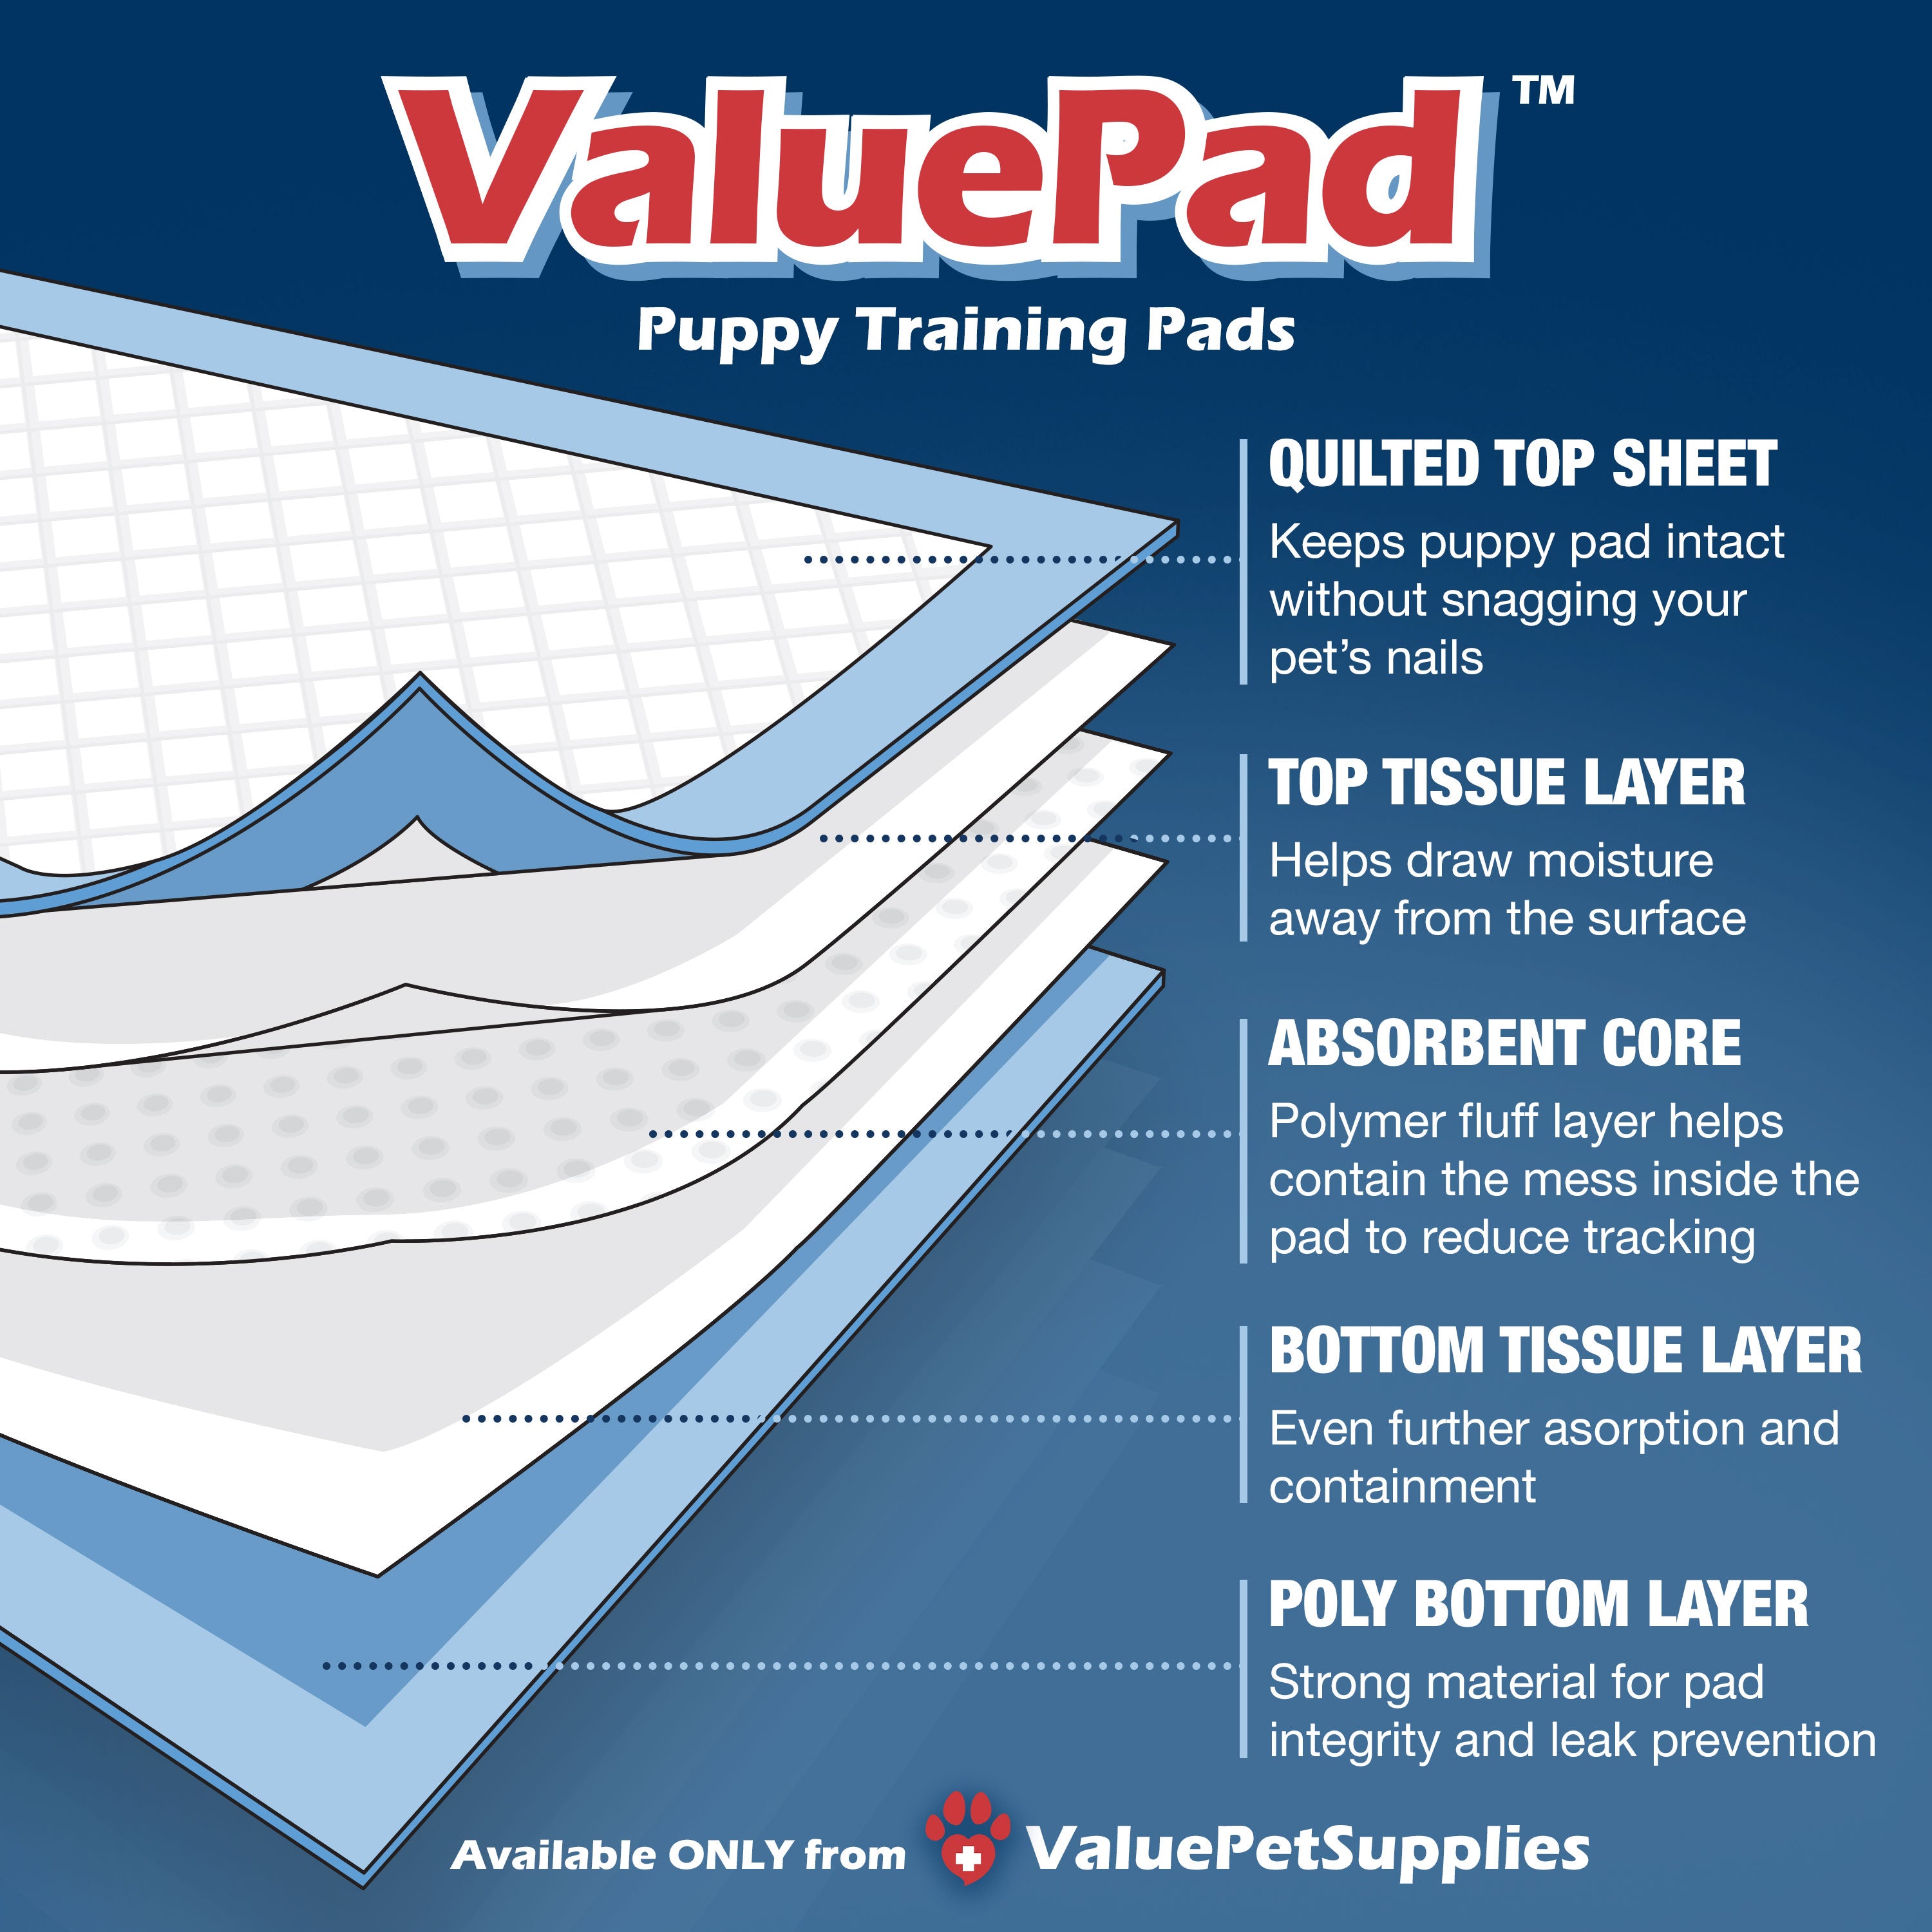 ValuePad Puppy Pads, XXL Gigantic 28x44 Inch, 400 Count WHOLESALE PACK